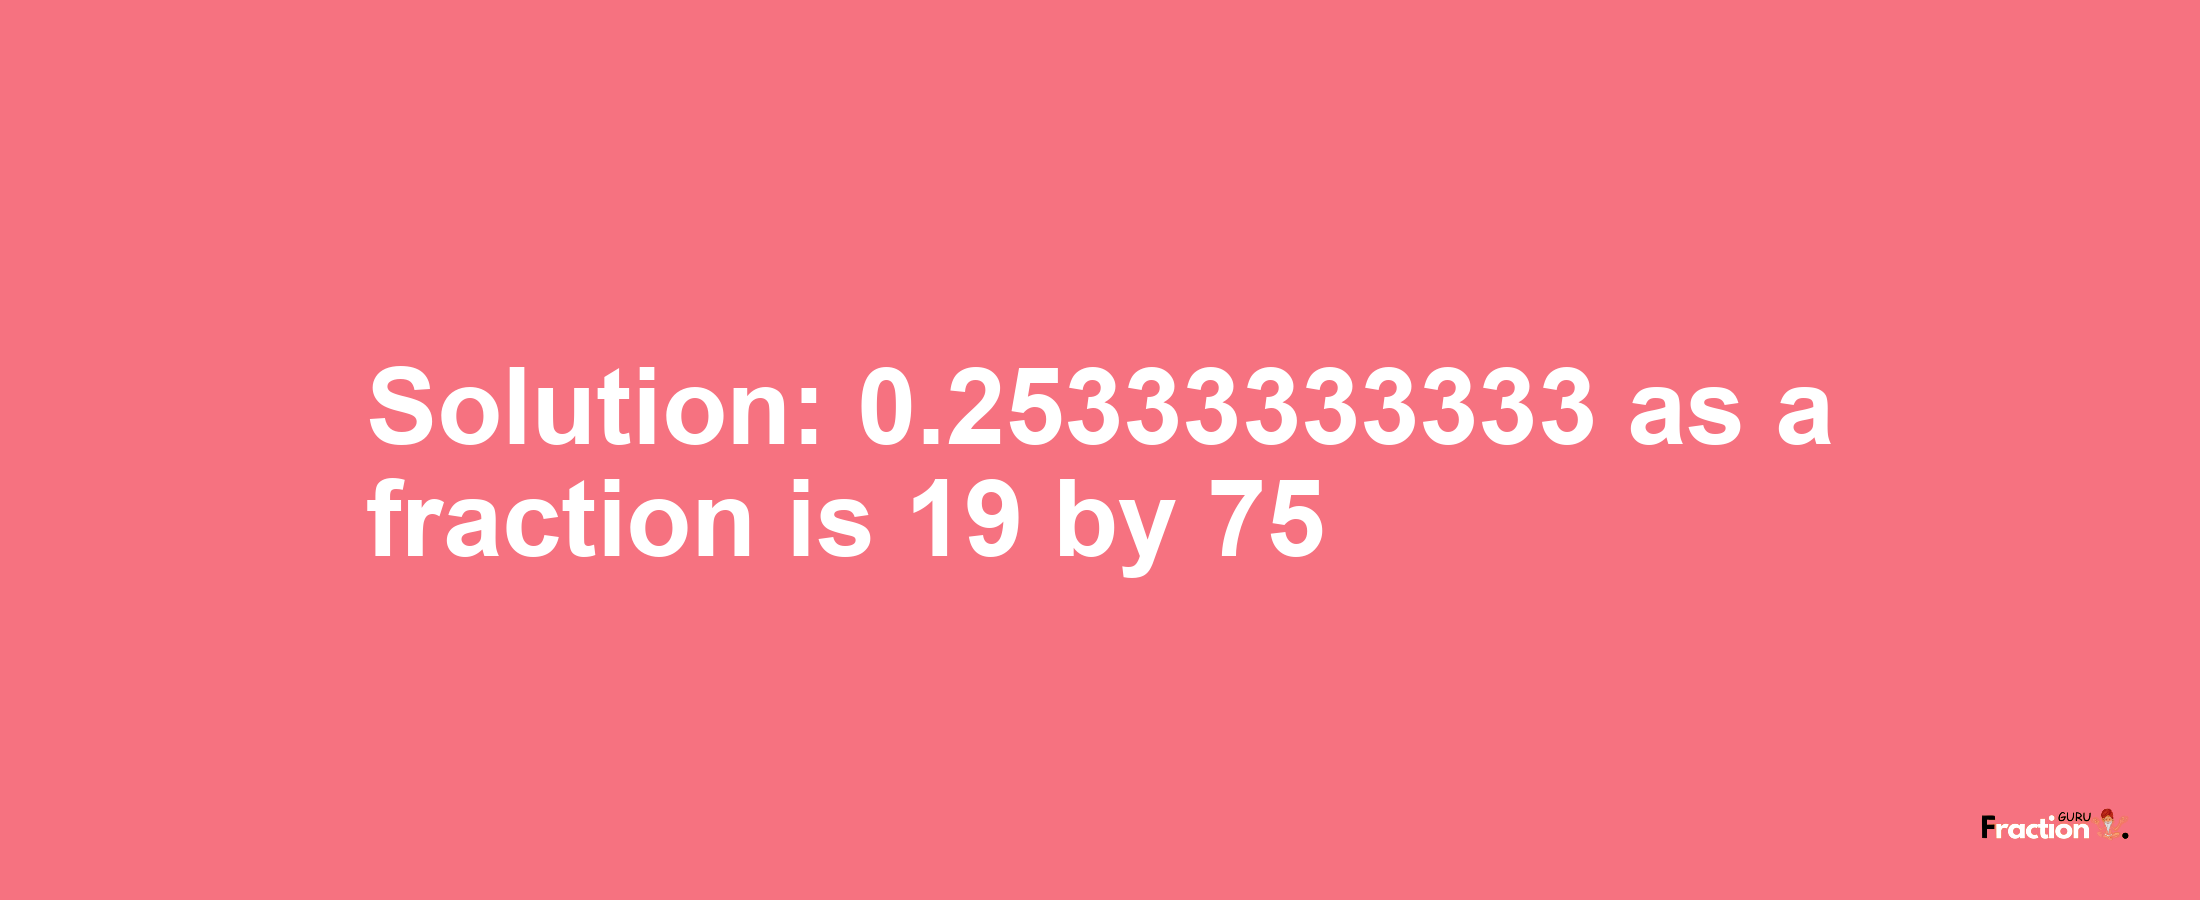 Solution:0.25333333333 as a fraction is 19/75